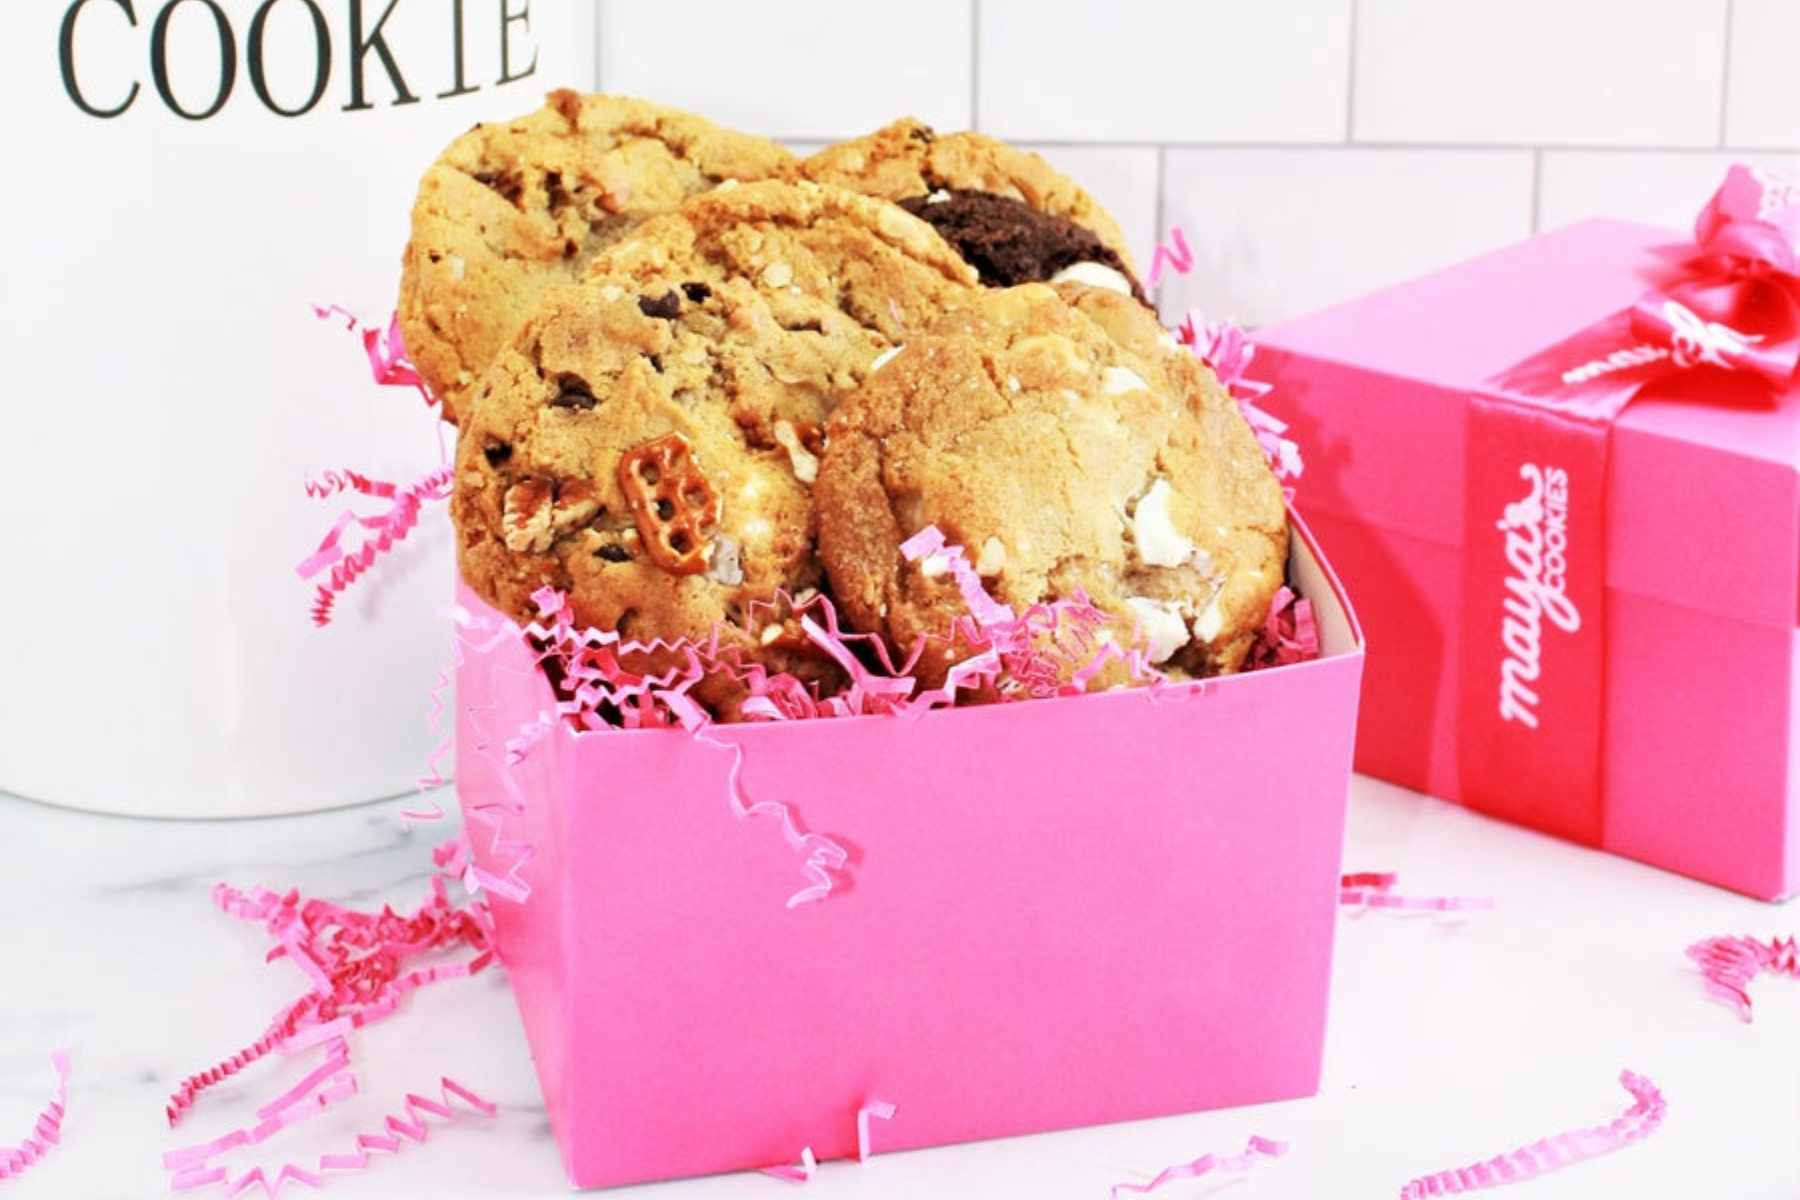 Maya's cookies assorted flavors in a pink box with a bow